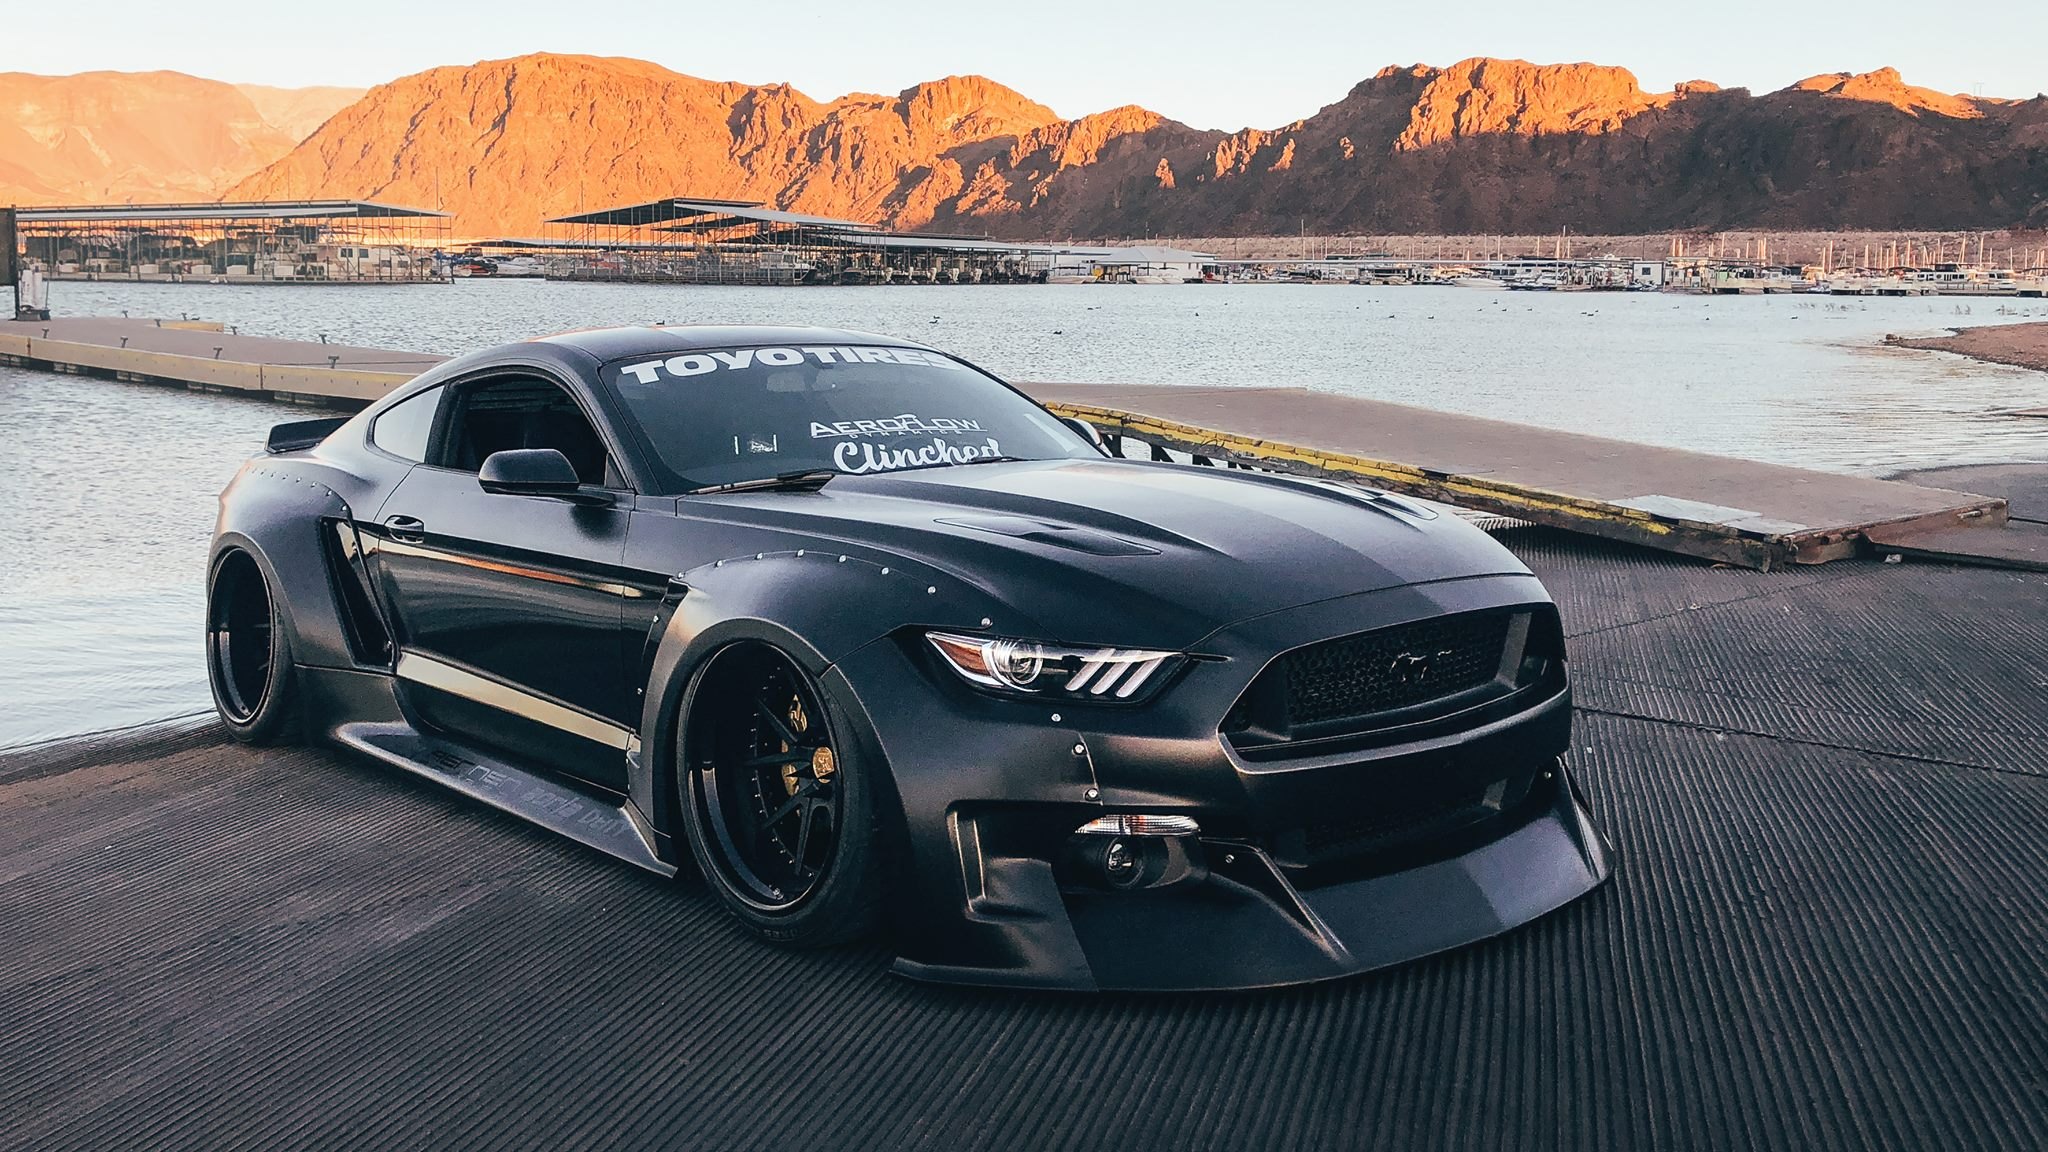 Black Ford Mustang GT with Custom Wheels - Photo by Clinched